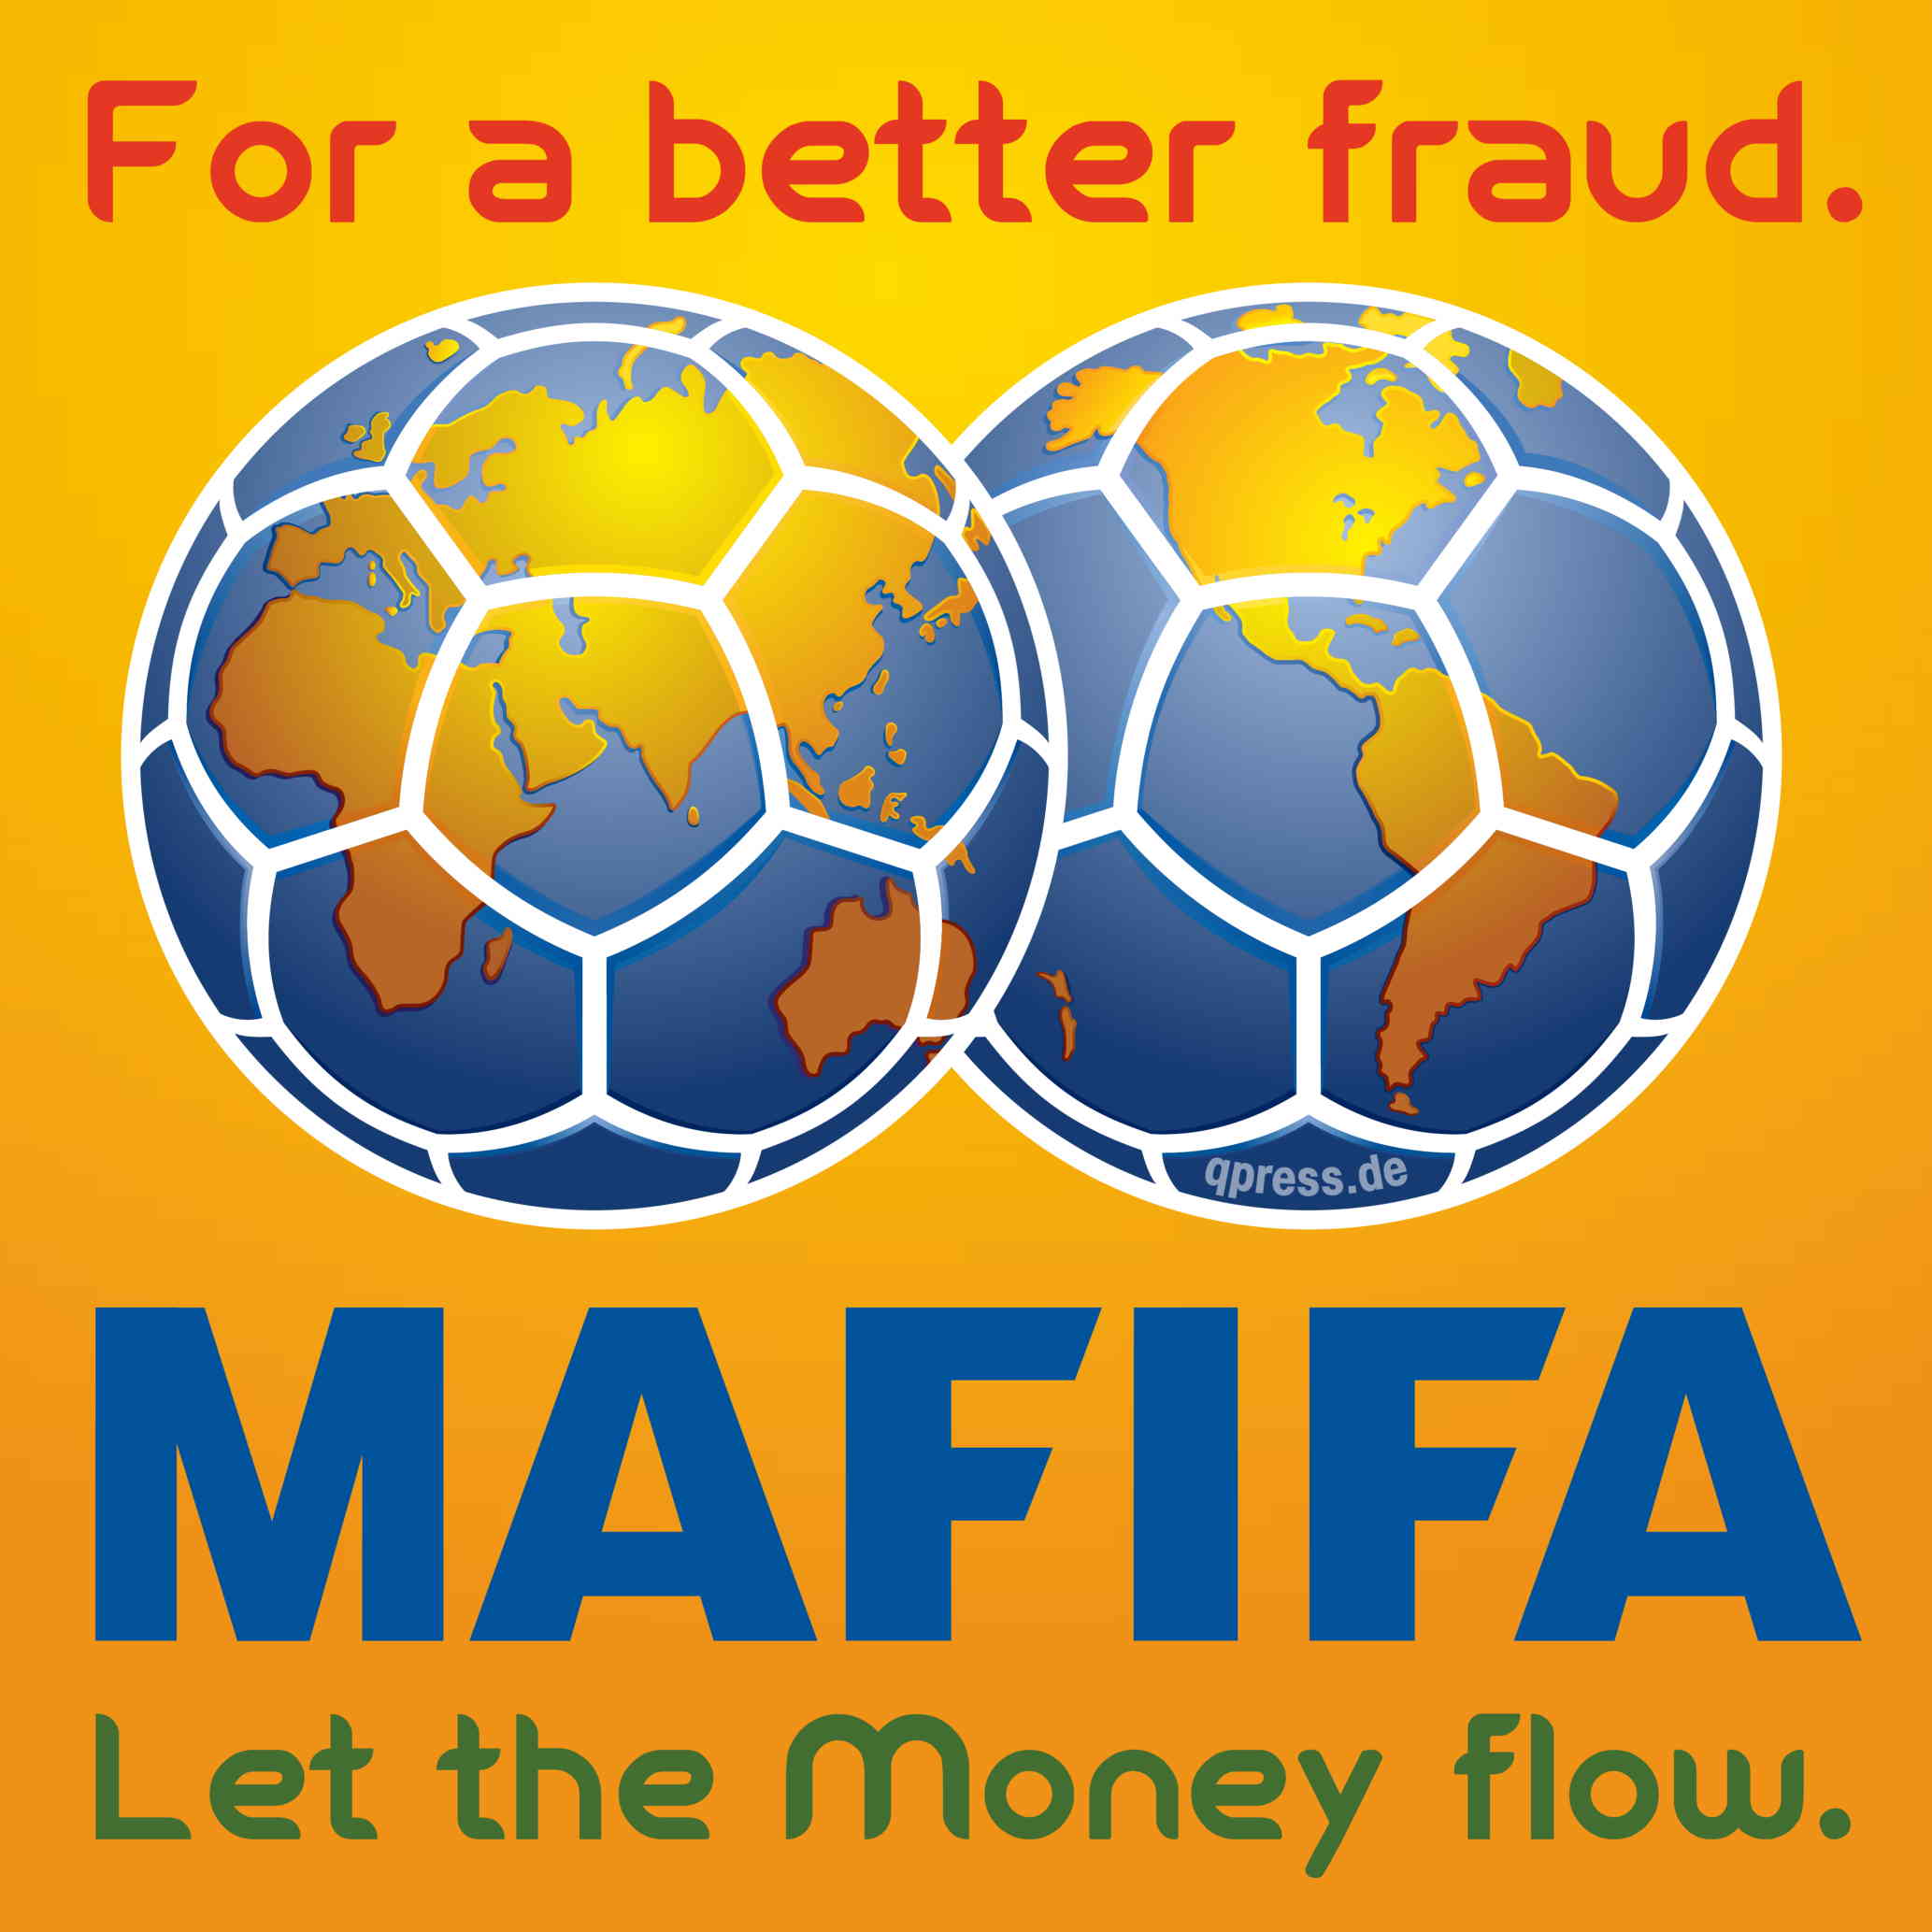 ma_fifa_logo_for_a_better_fraud_let_the_money_flow_qpress